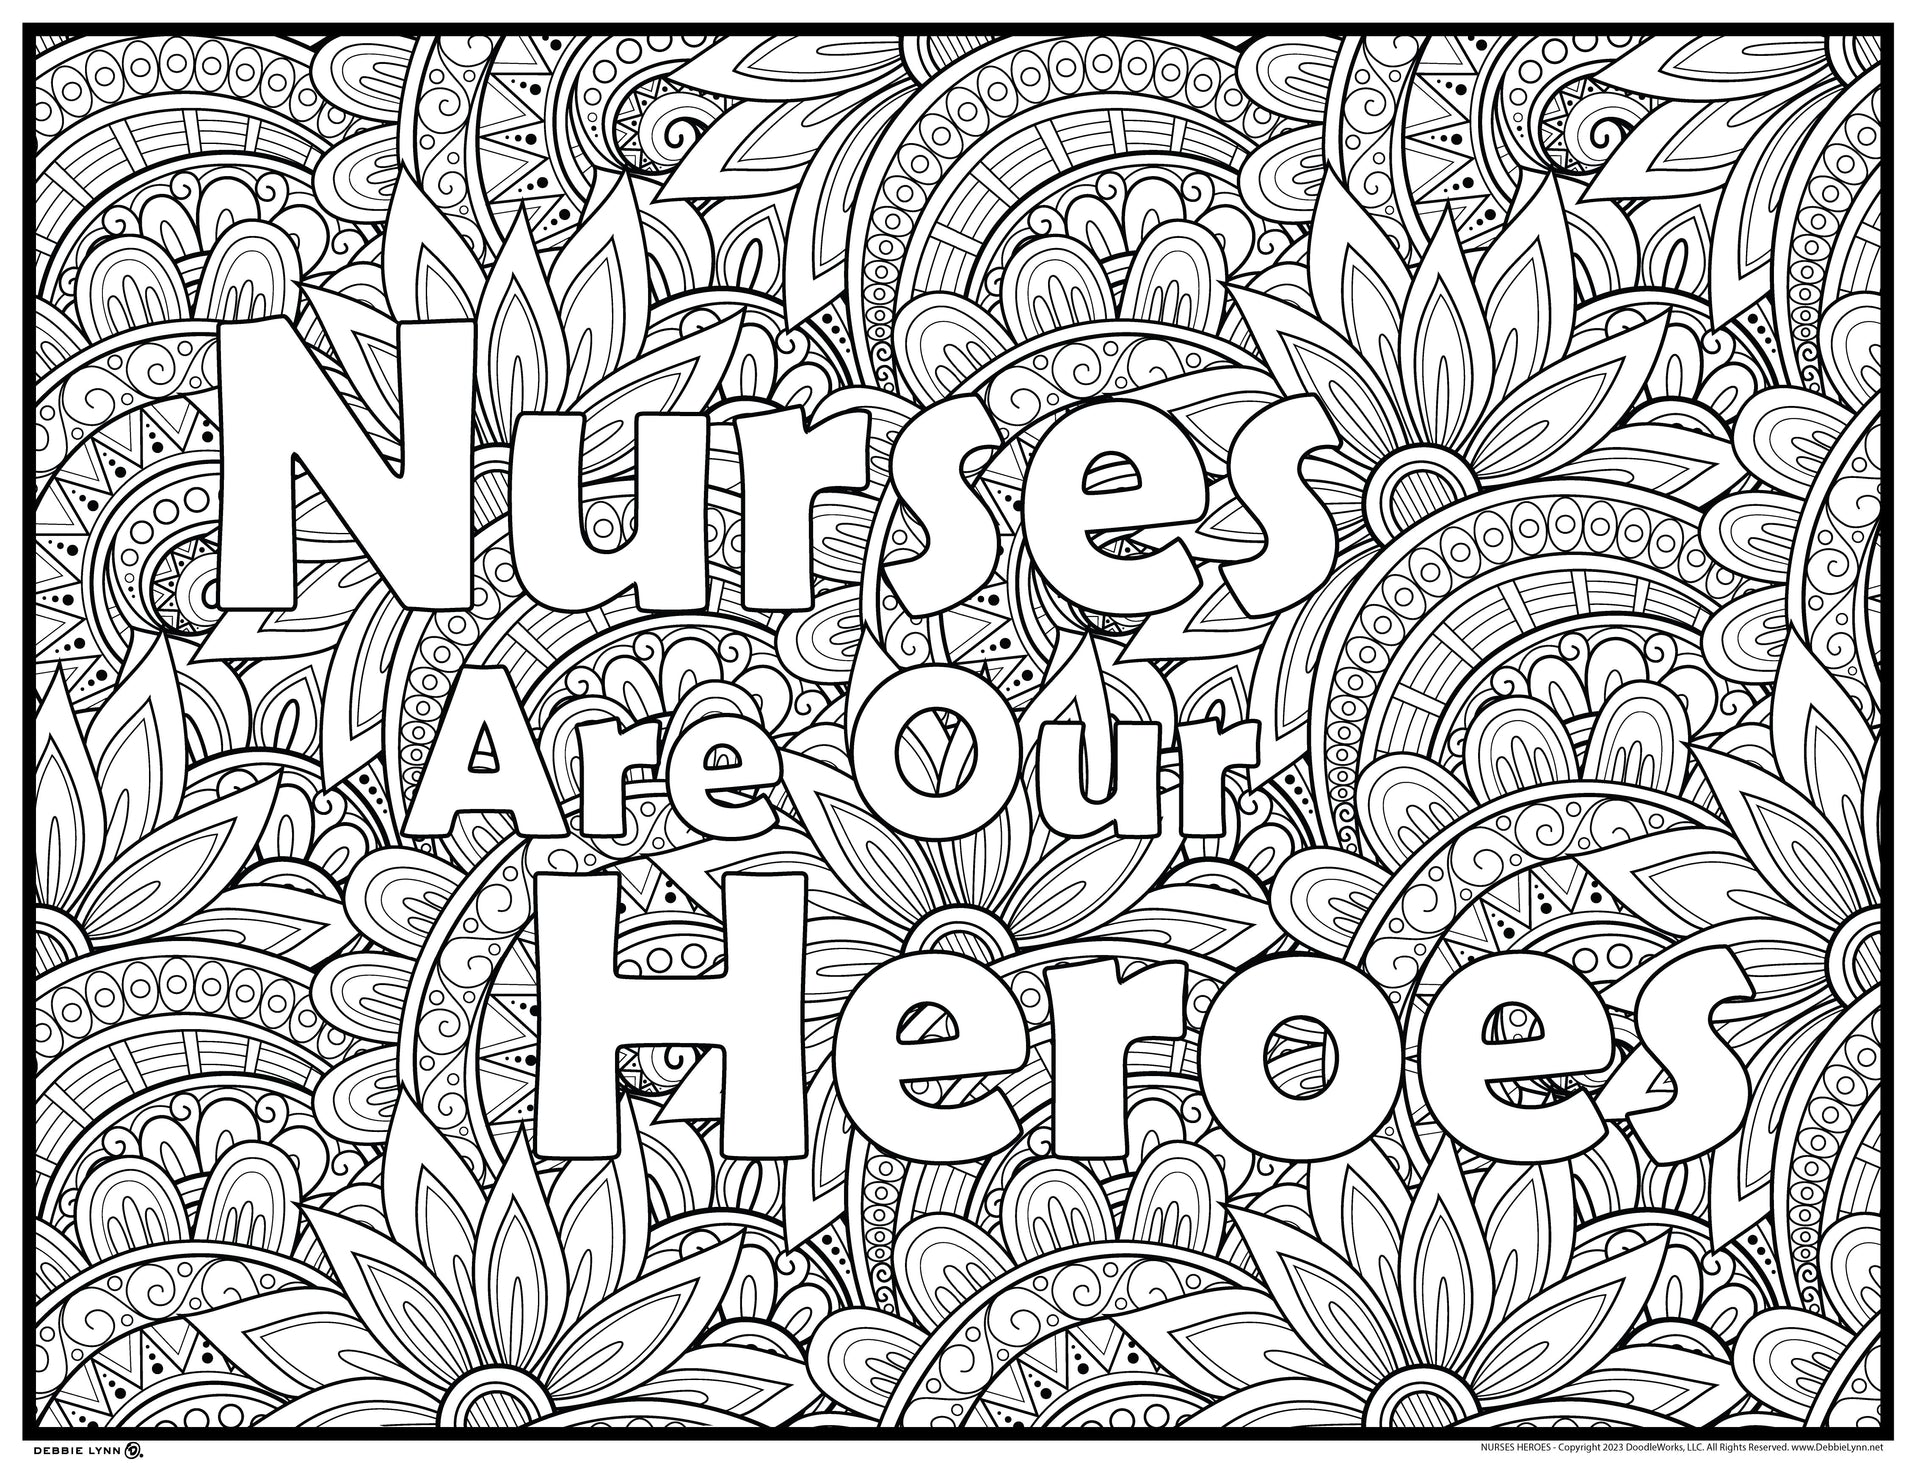 Nurses are our heroes personalized giant coloring poster x â debbie lynn